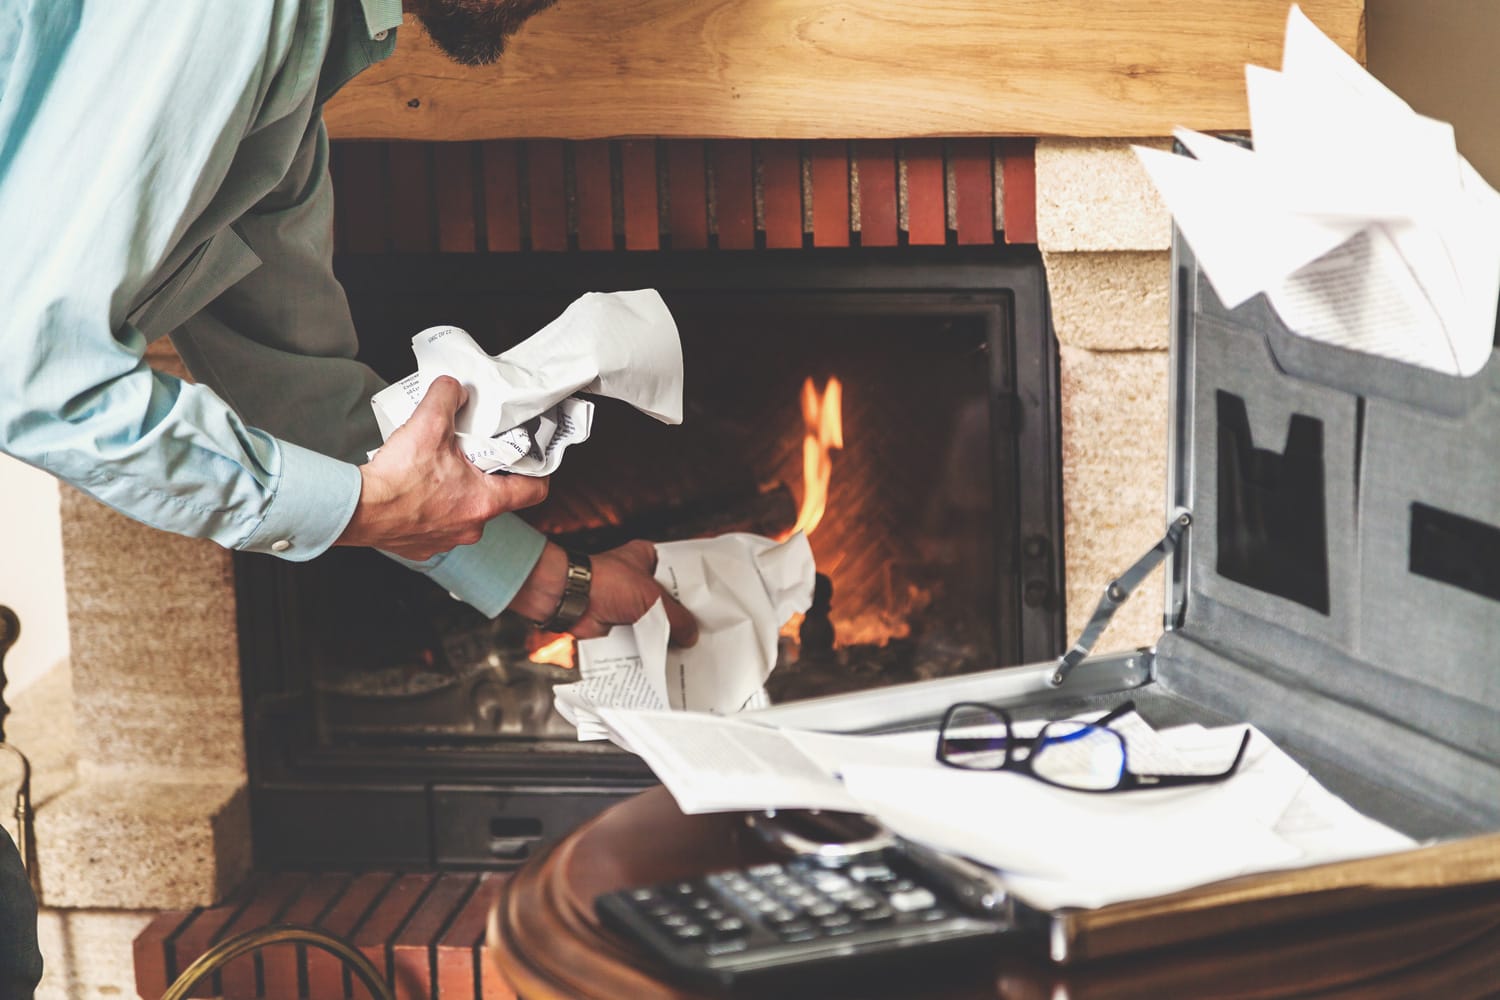 audit documents. Hands of businessman crushes paper documents from an open briefcase before burning fireplace. On top of the papers are fashionable glasses